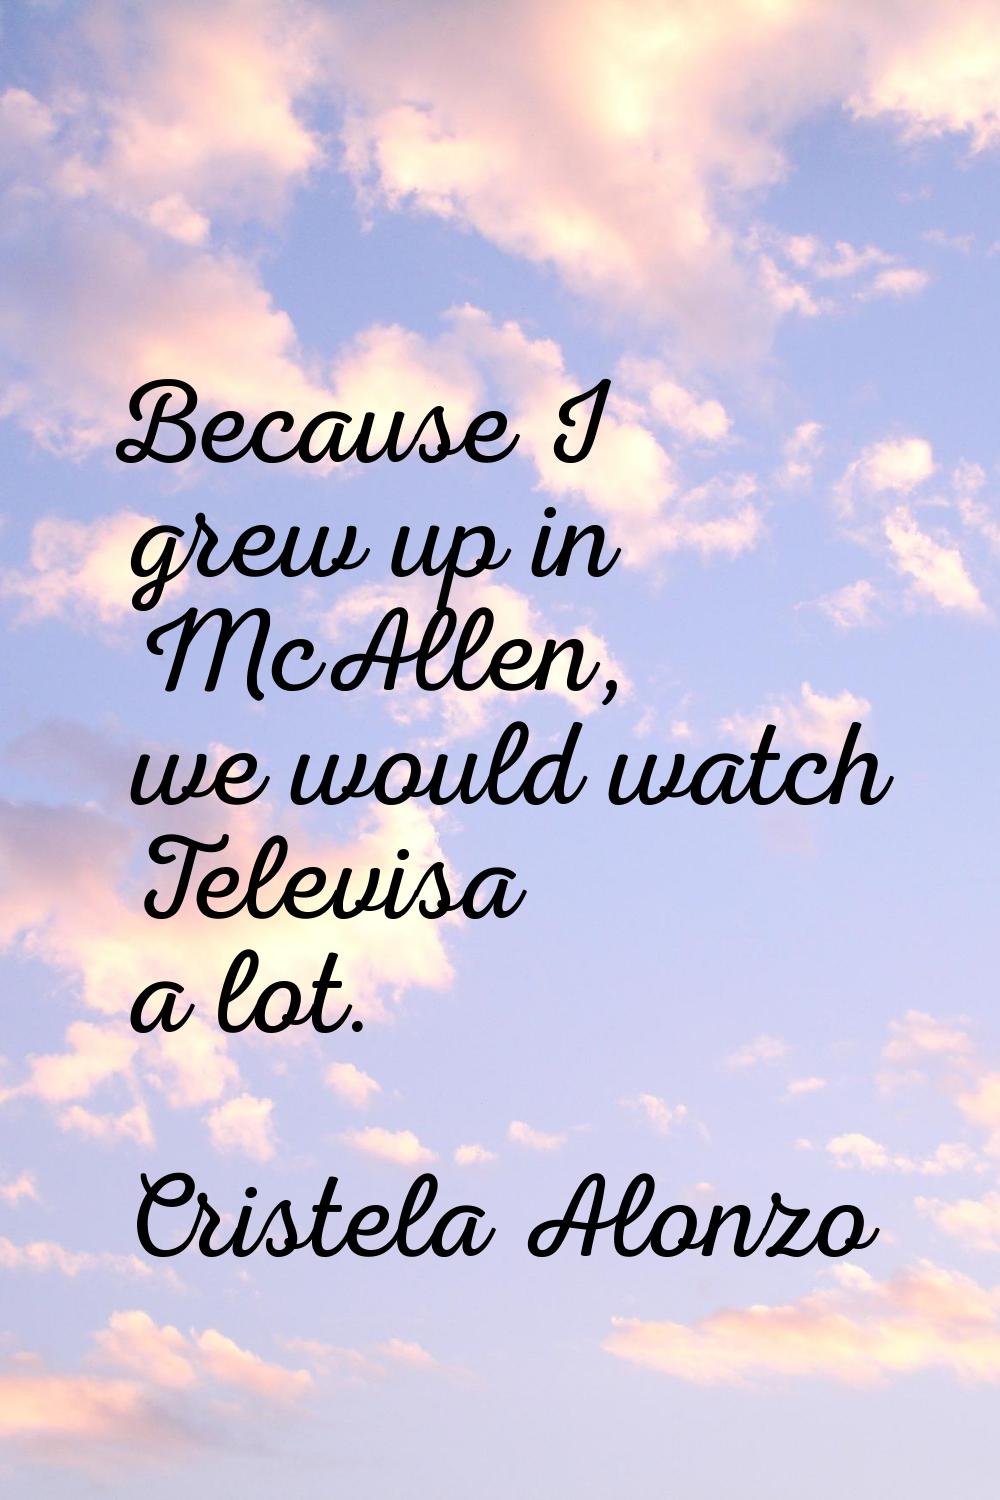 Because I grew up in McAllen, we would watch Televisa a lot.